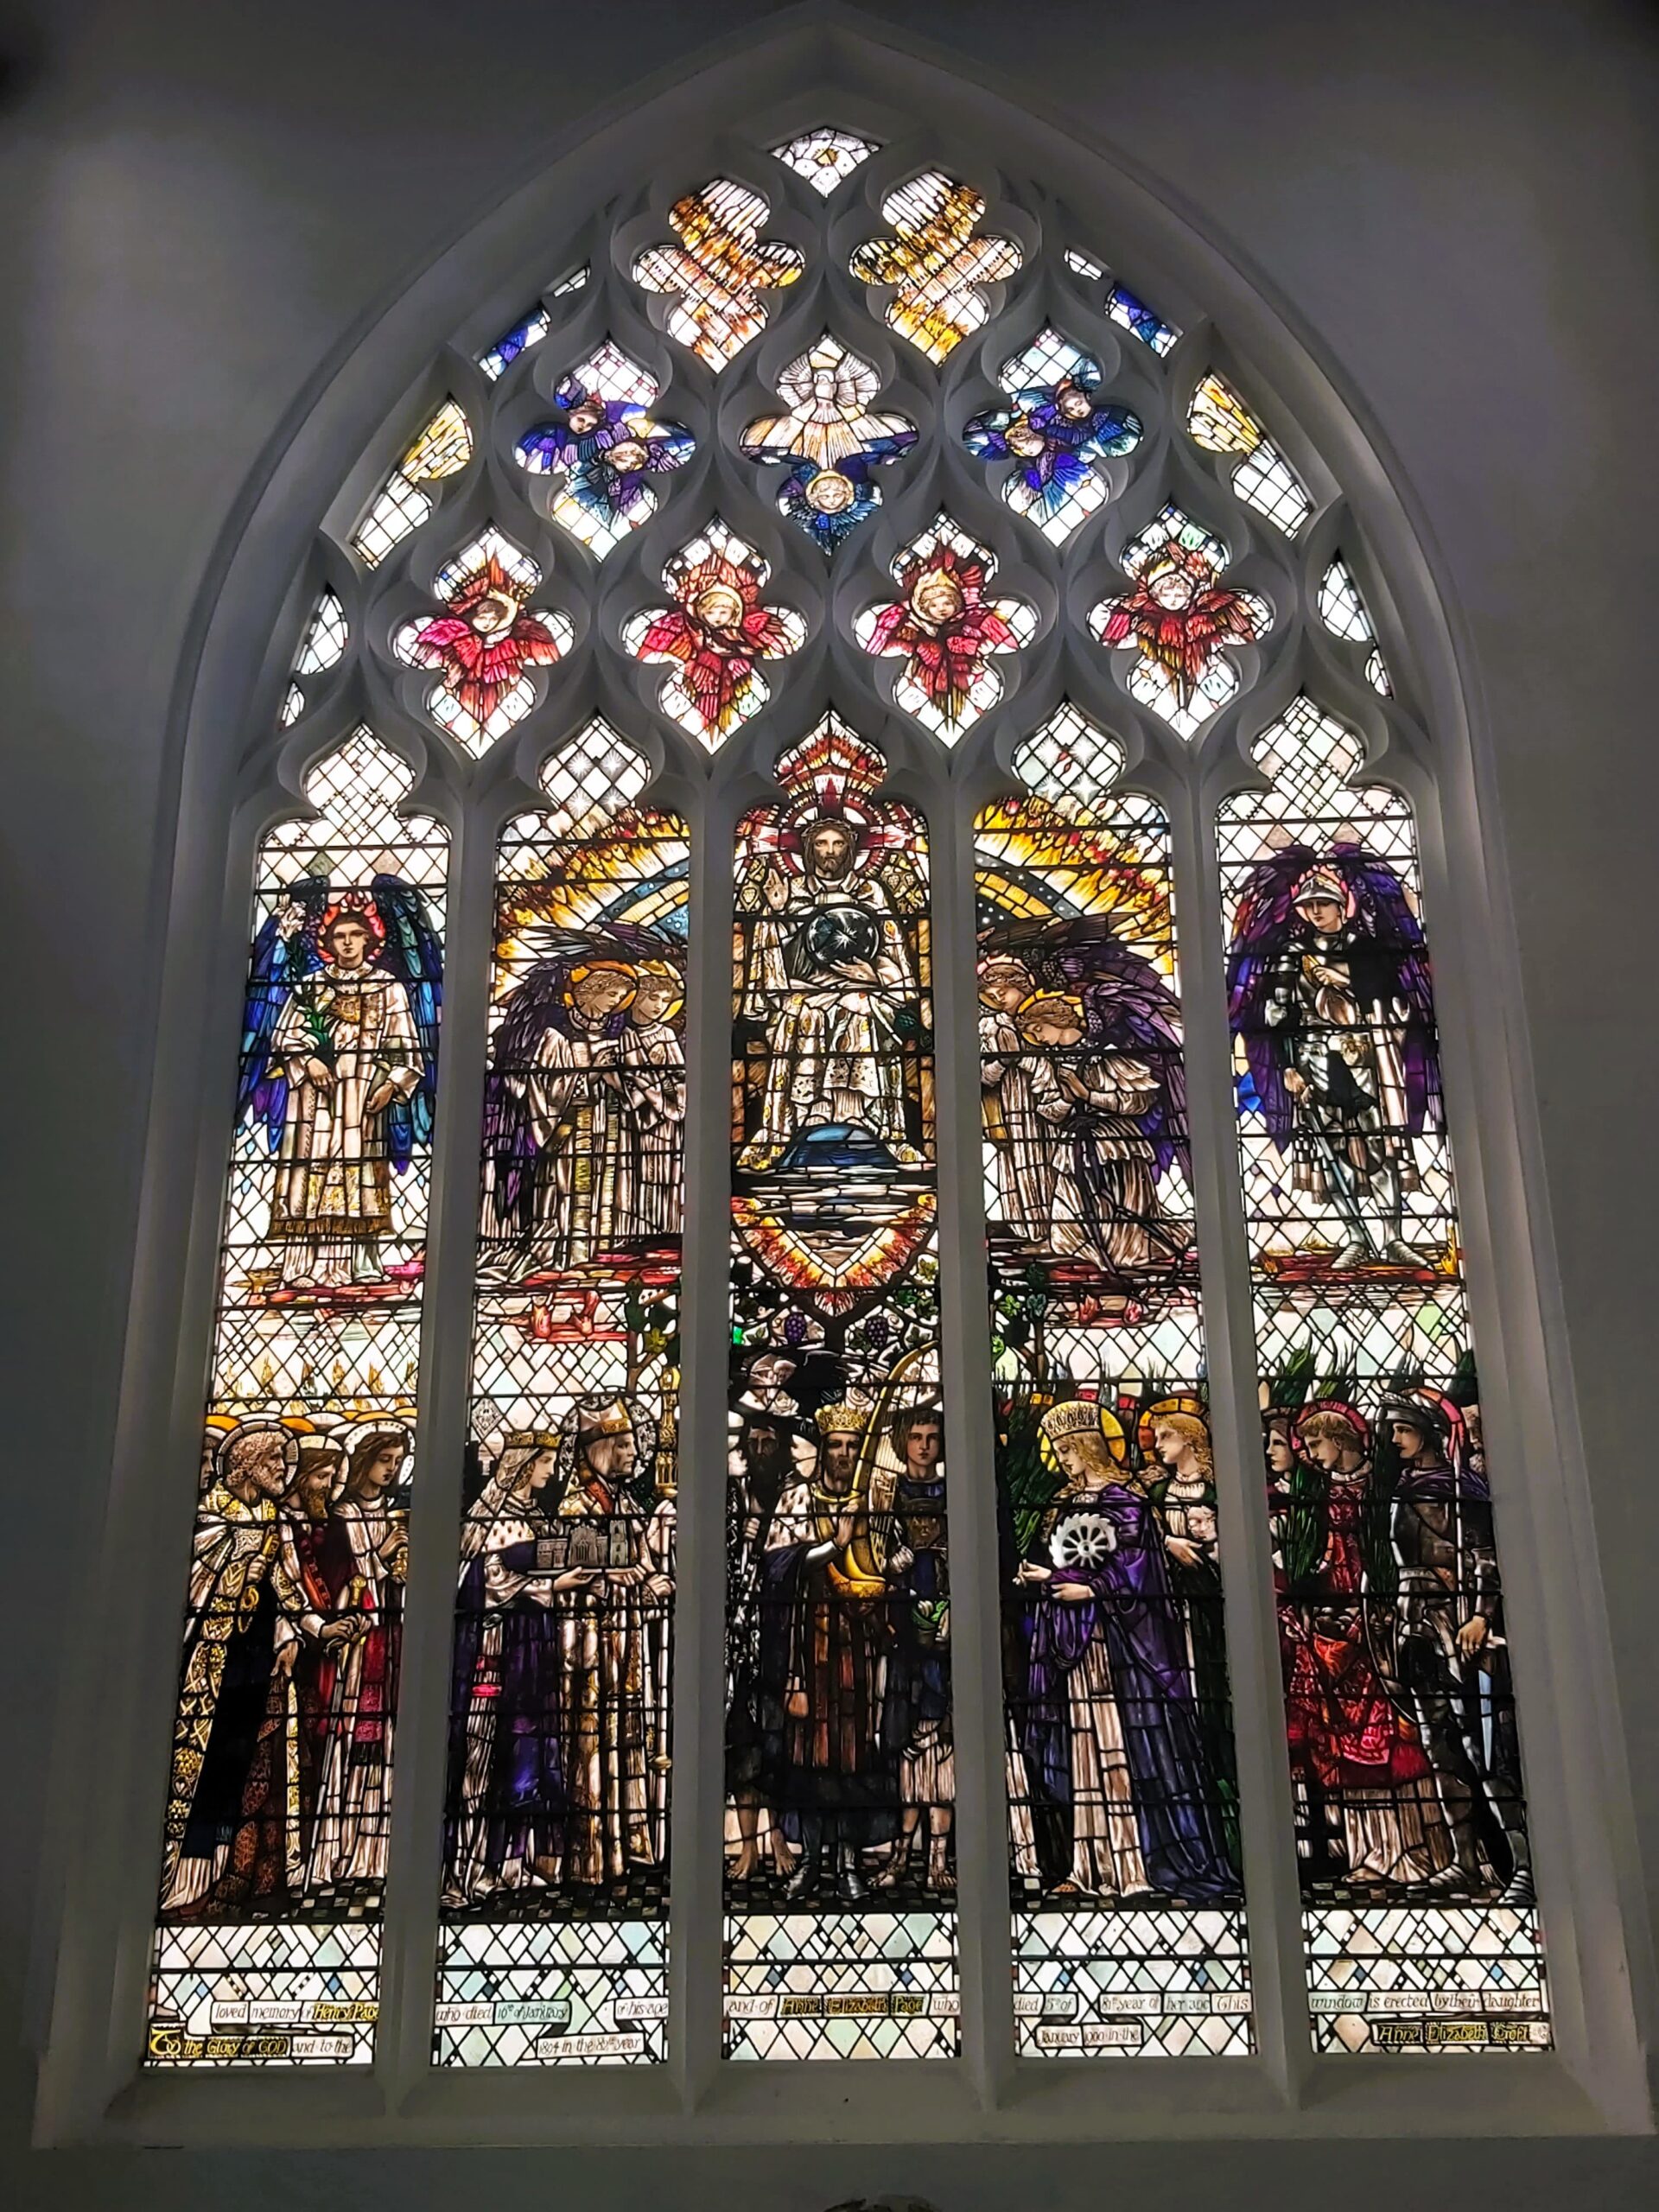 A large stained glass window in St Mary's Church, Ware, England